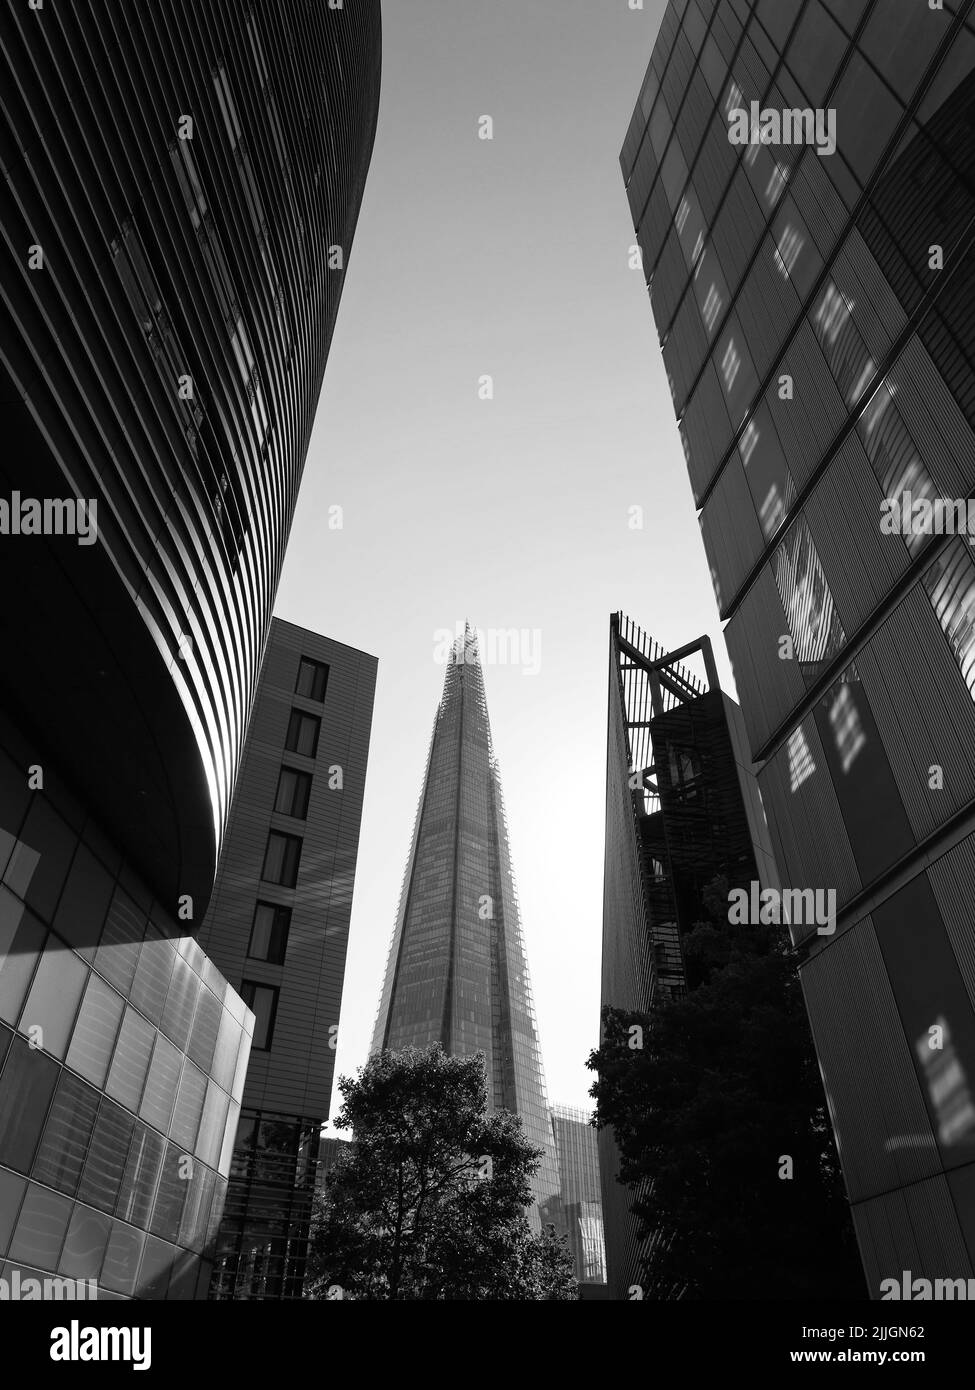 London, Greater London, England, June 22 2022: Looking through buildings on the south bank towards The Shard Skyscraper. Monochrome Stock Photo